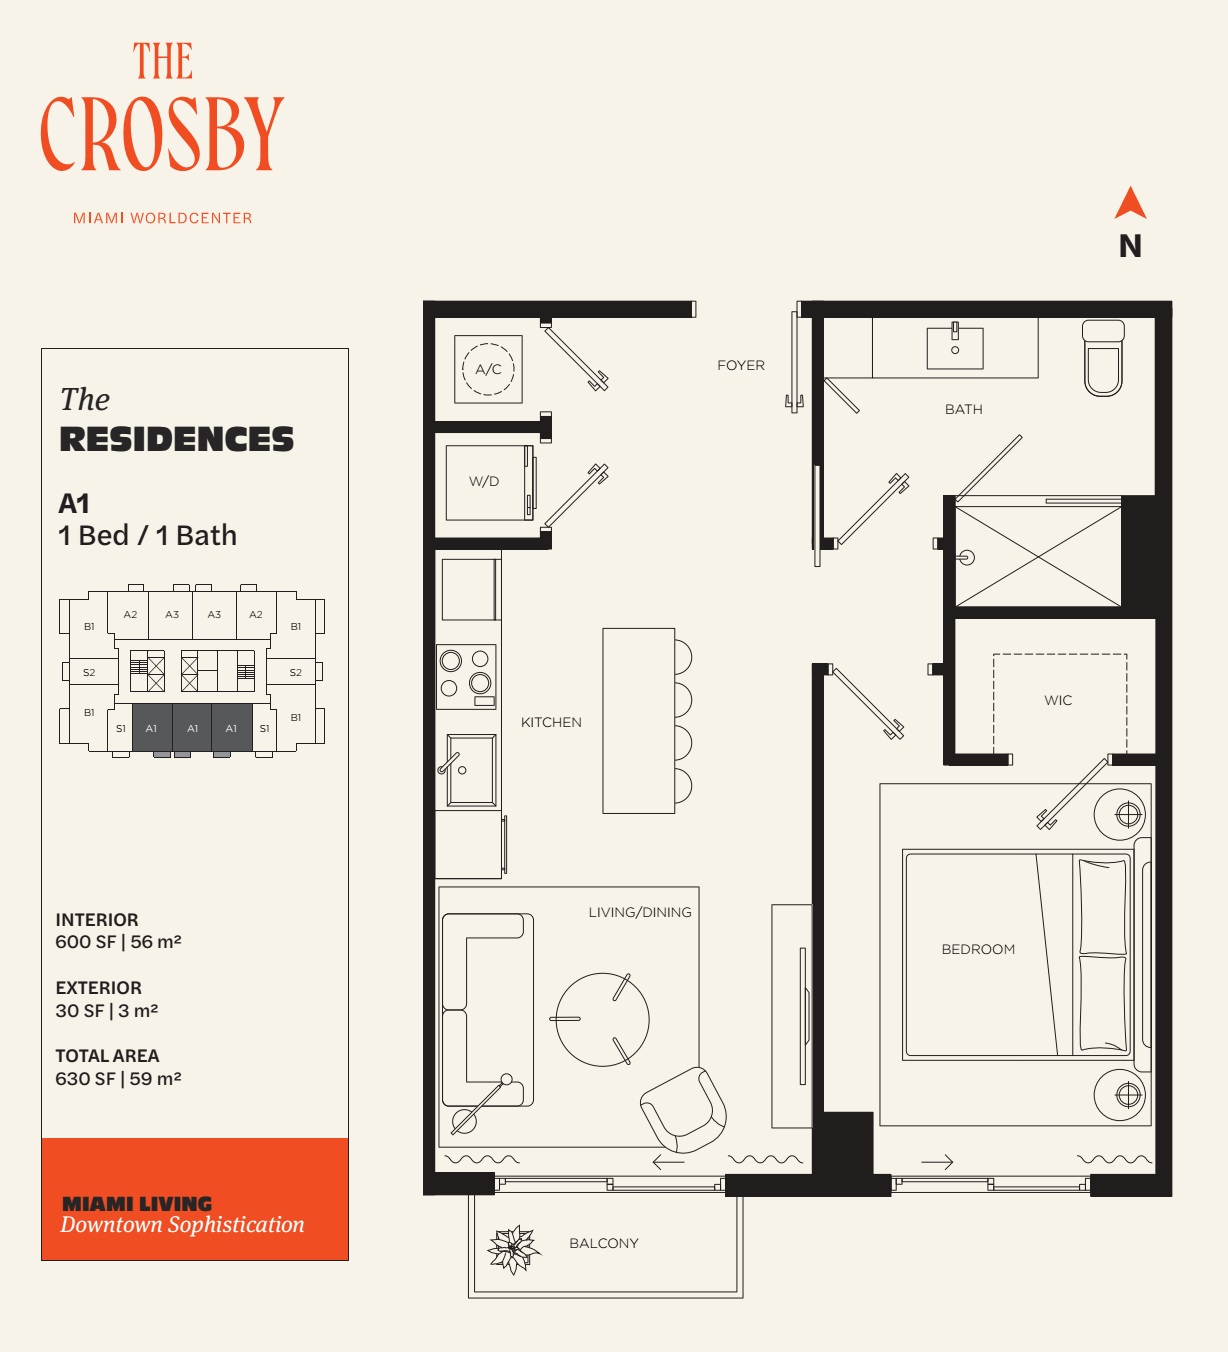 The Crosby Miami Worldcenter Residence A1